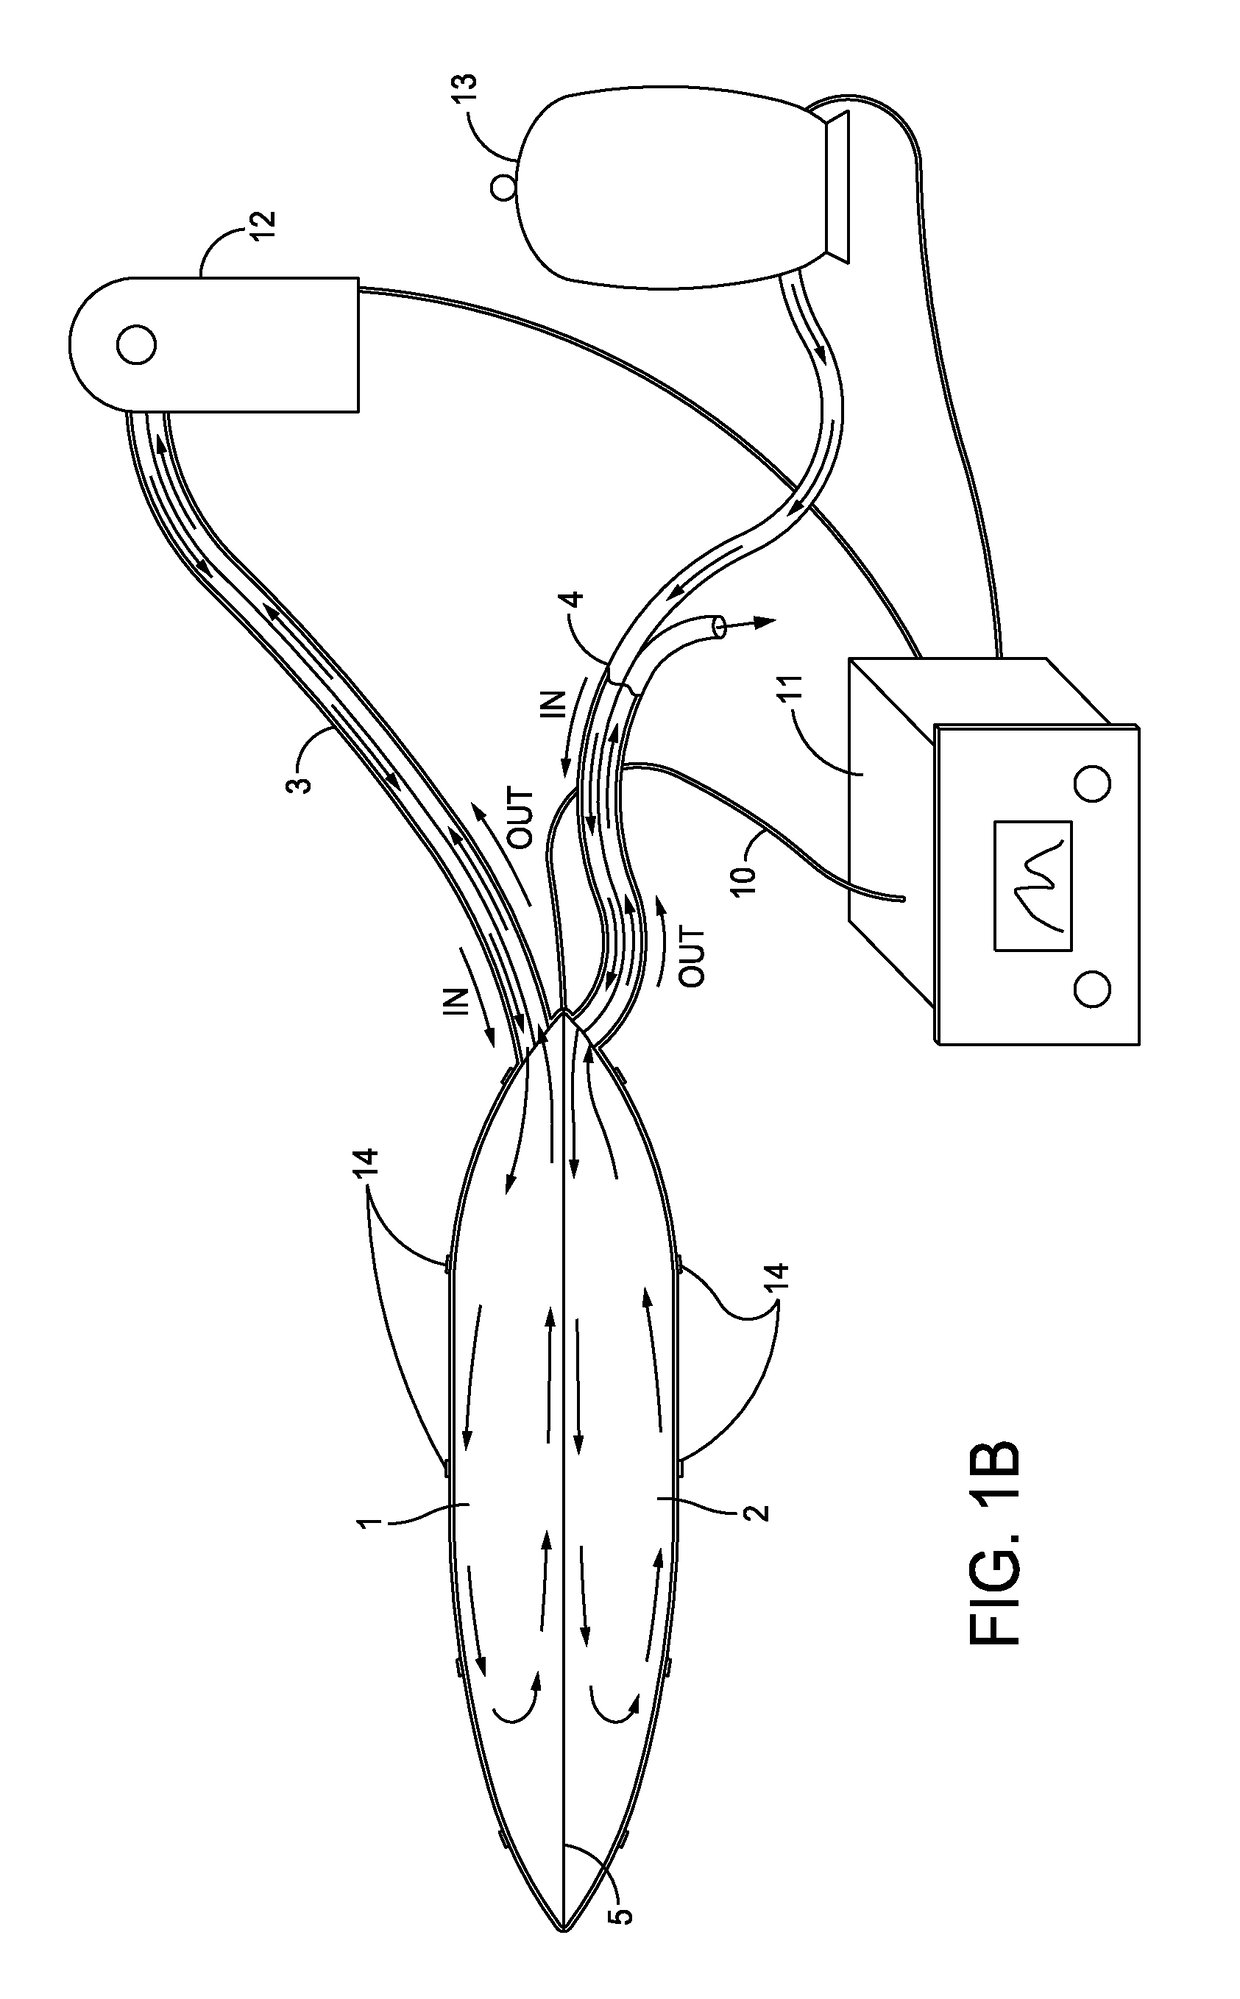 Action/counteraction superimposed double chamber broad area tissue ablation device